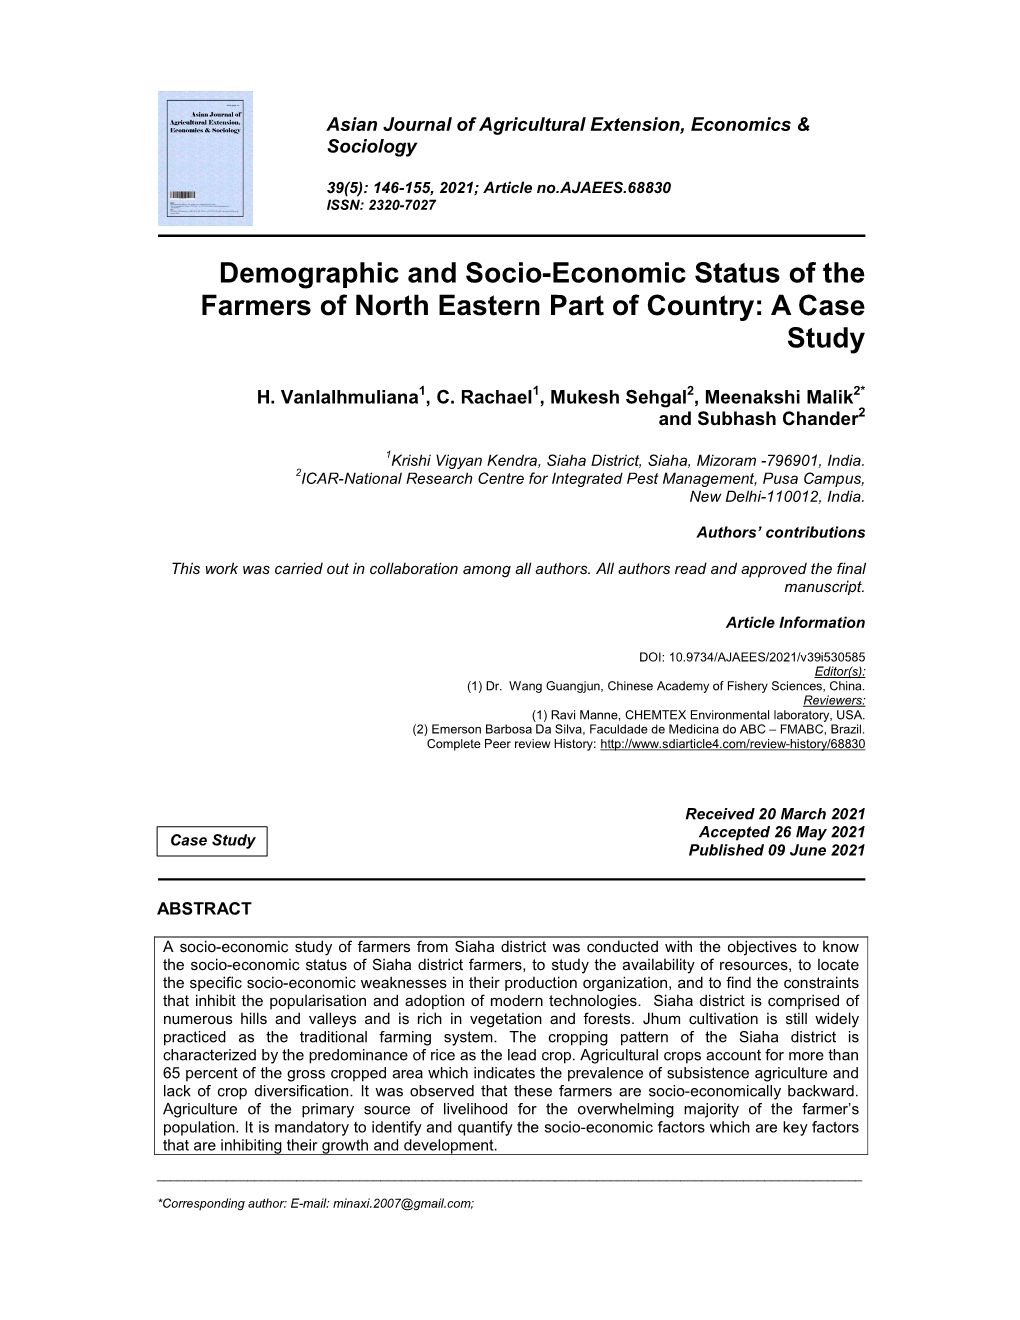 Demographic and Socio-Economic Status of the Farmers of North Eastern Part of Country: a Case Study